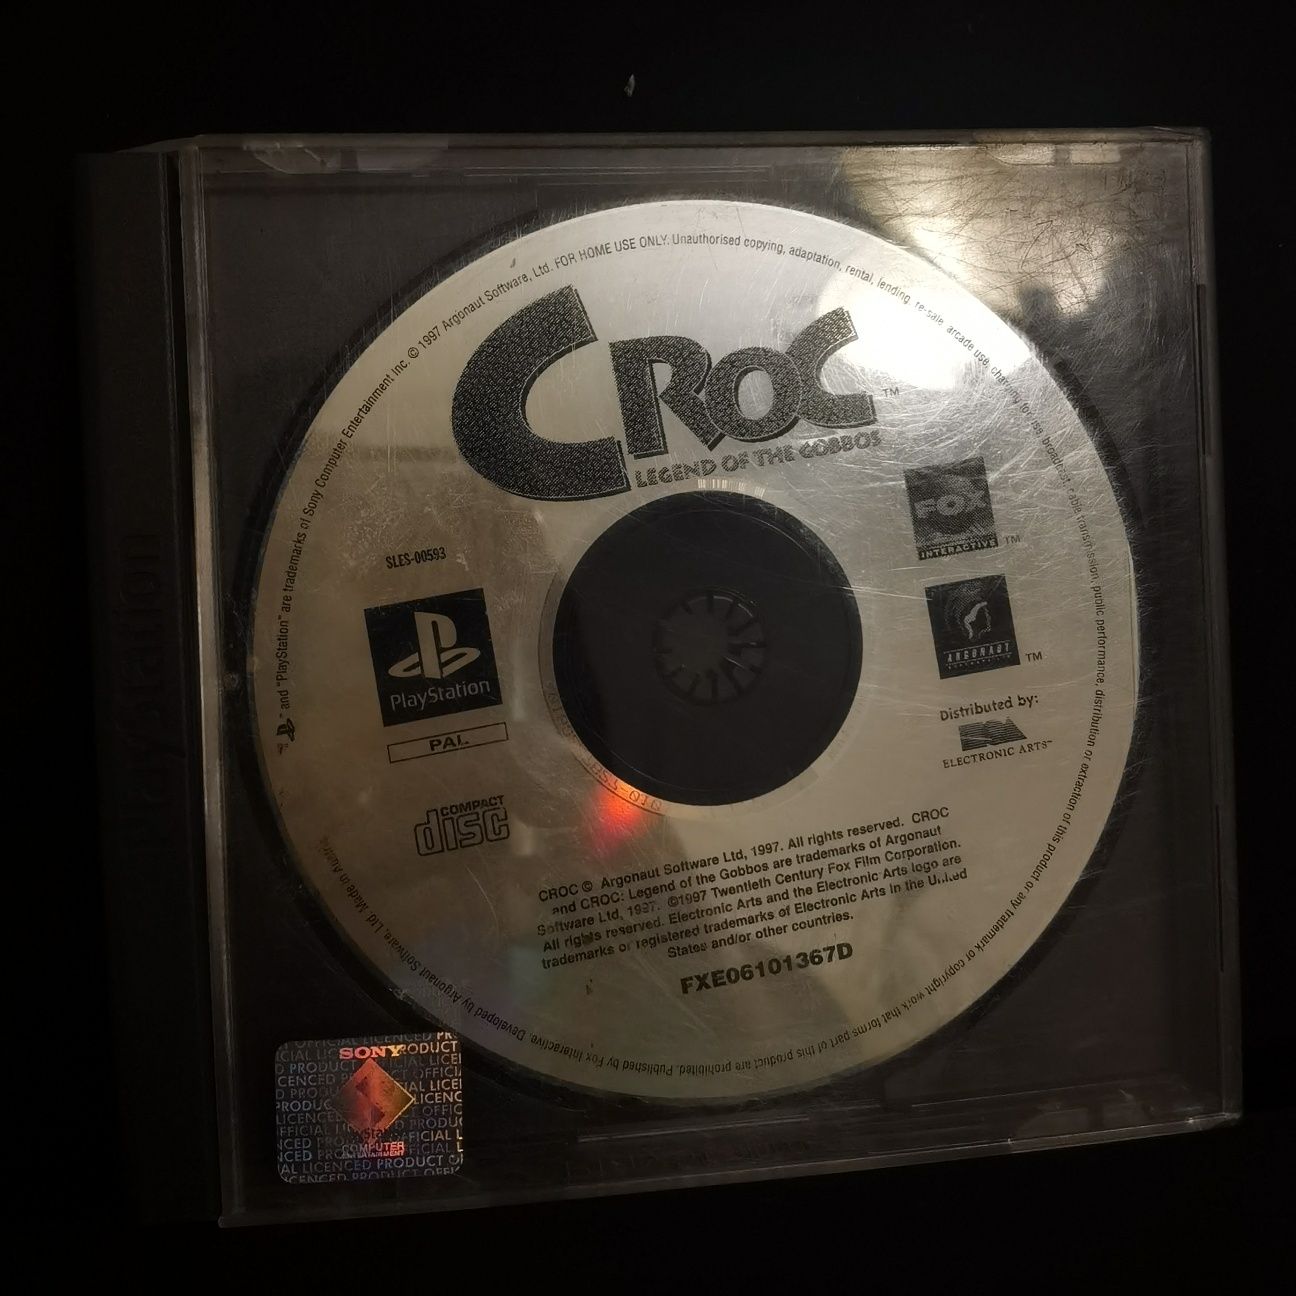 Croc Legend of the gobbos Ps1